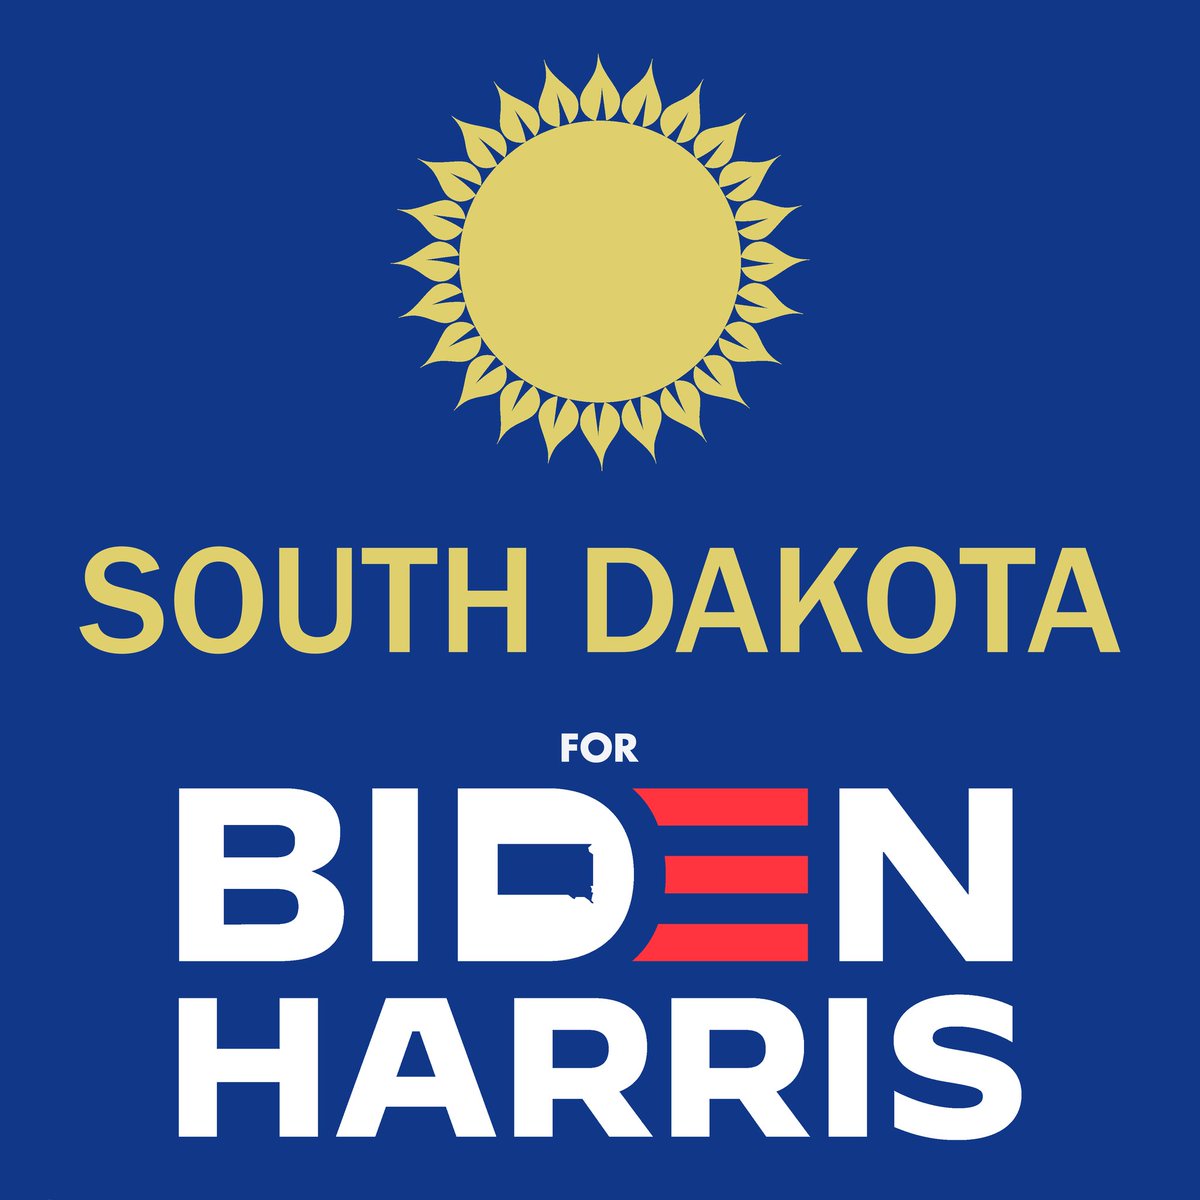 ICYMI my husband  @viva_verde is incredibly talented and made these beautiful state coalition graphics for  #BidenHarris supporters. More otw and he takes requests for priority! RT your state if you're  #RidinWithBidenHarris 7/8  #SouthDakota  #Tennessee  #Texas  #Utah